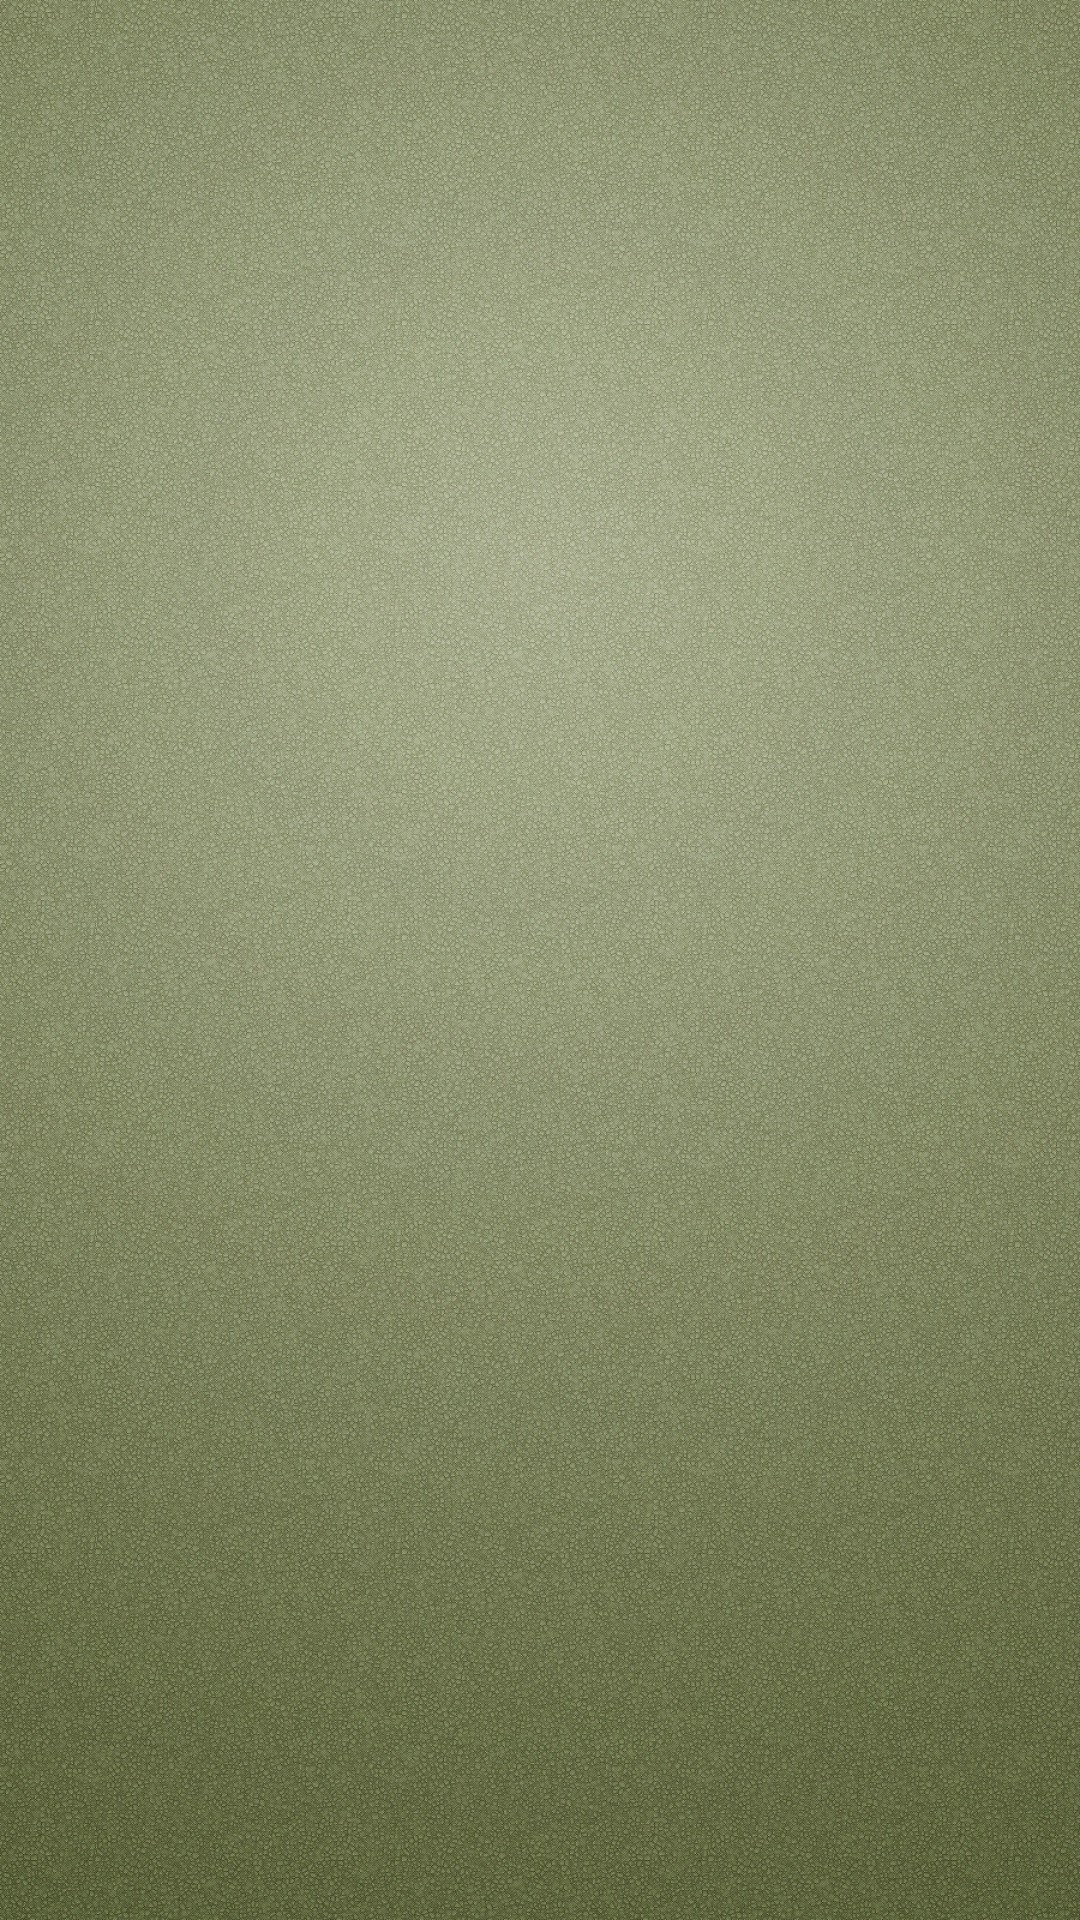 Wallpaper surface, solid, color